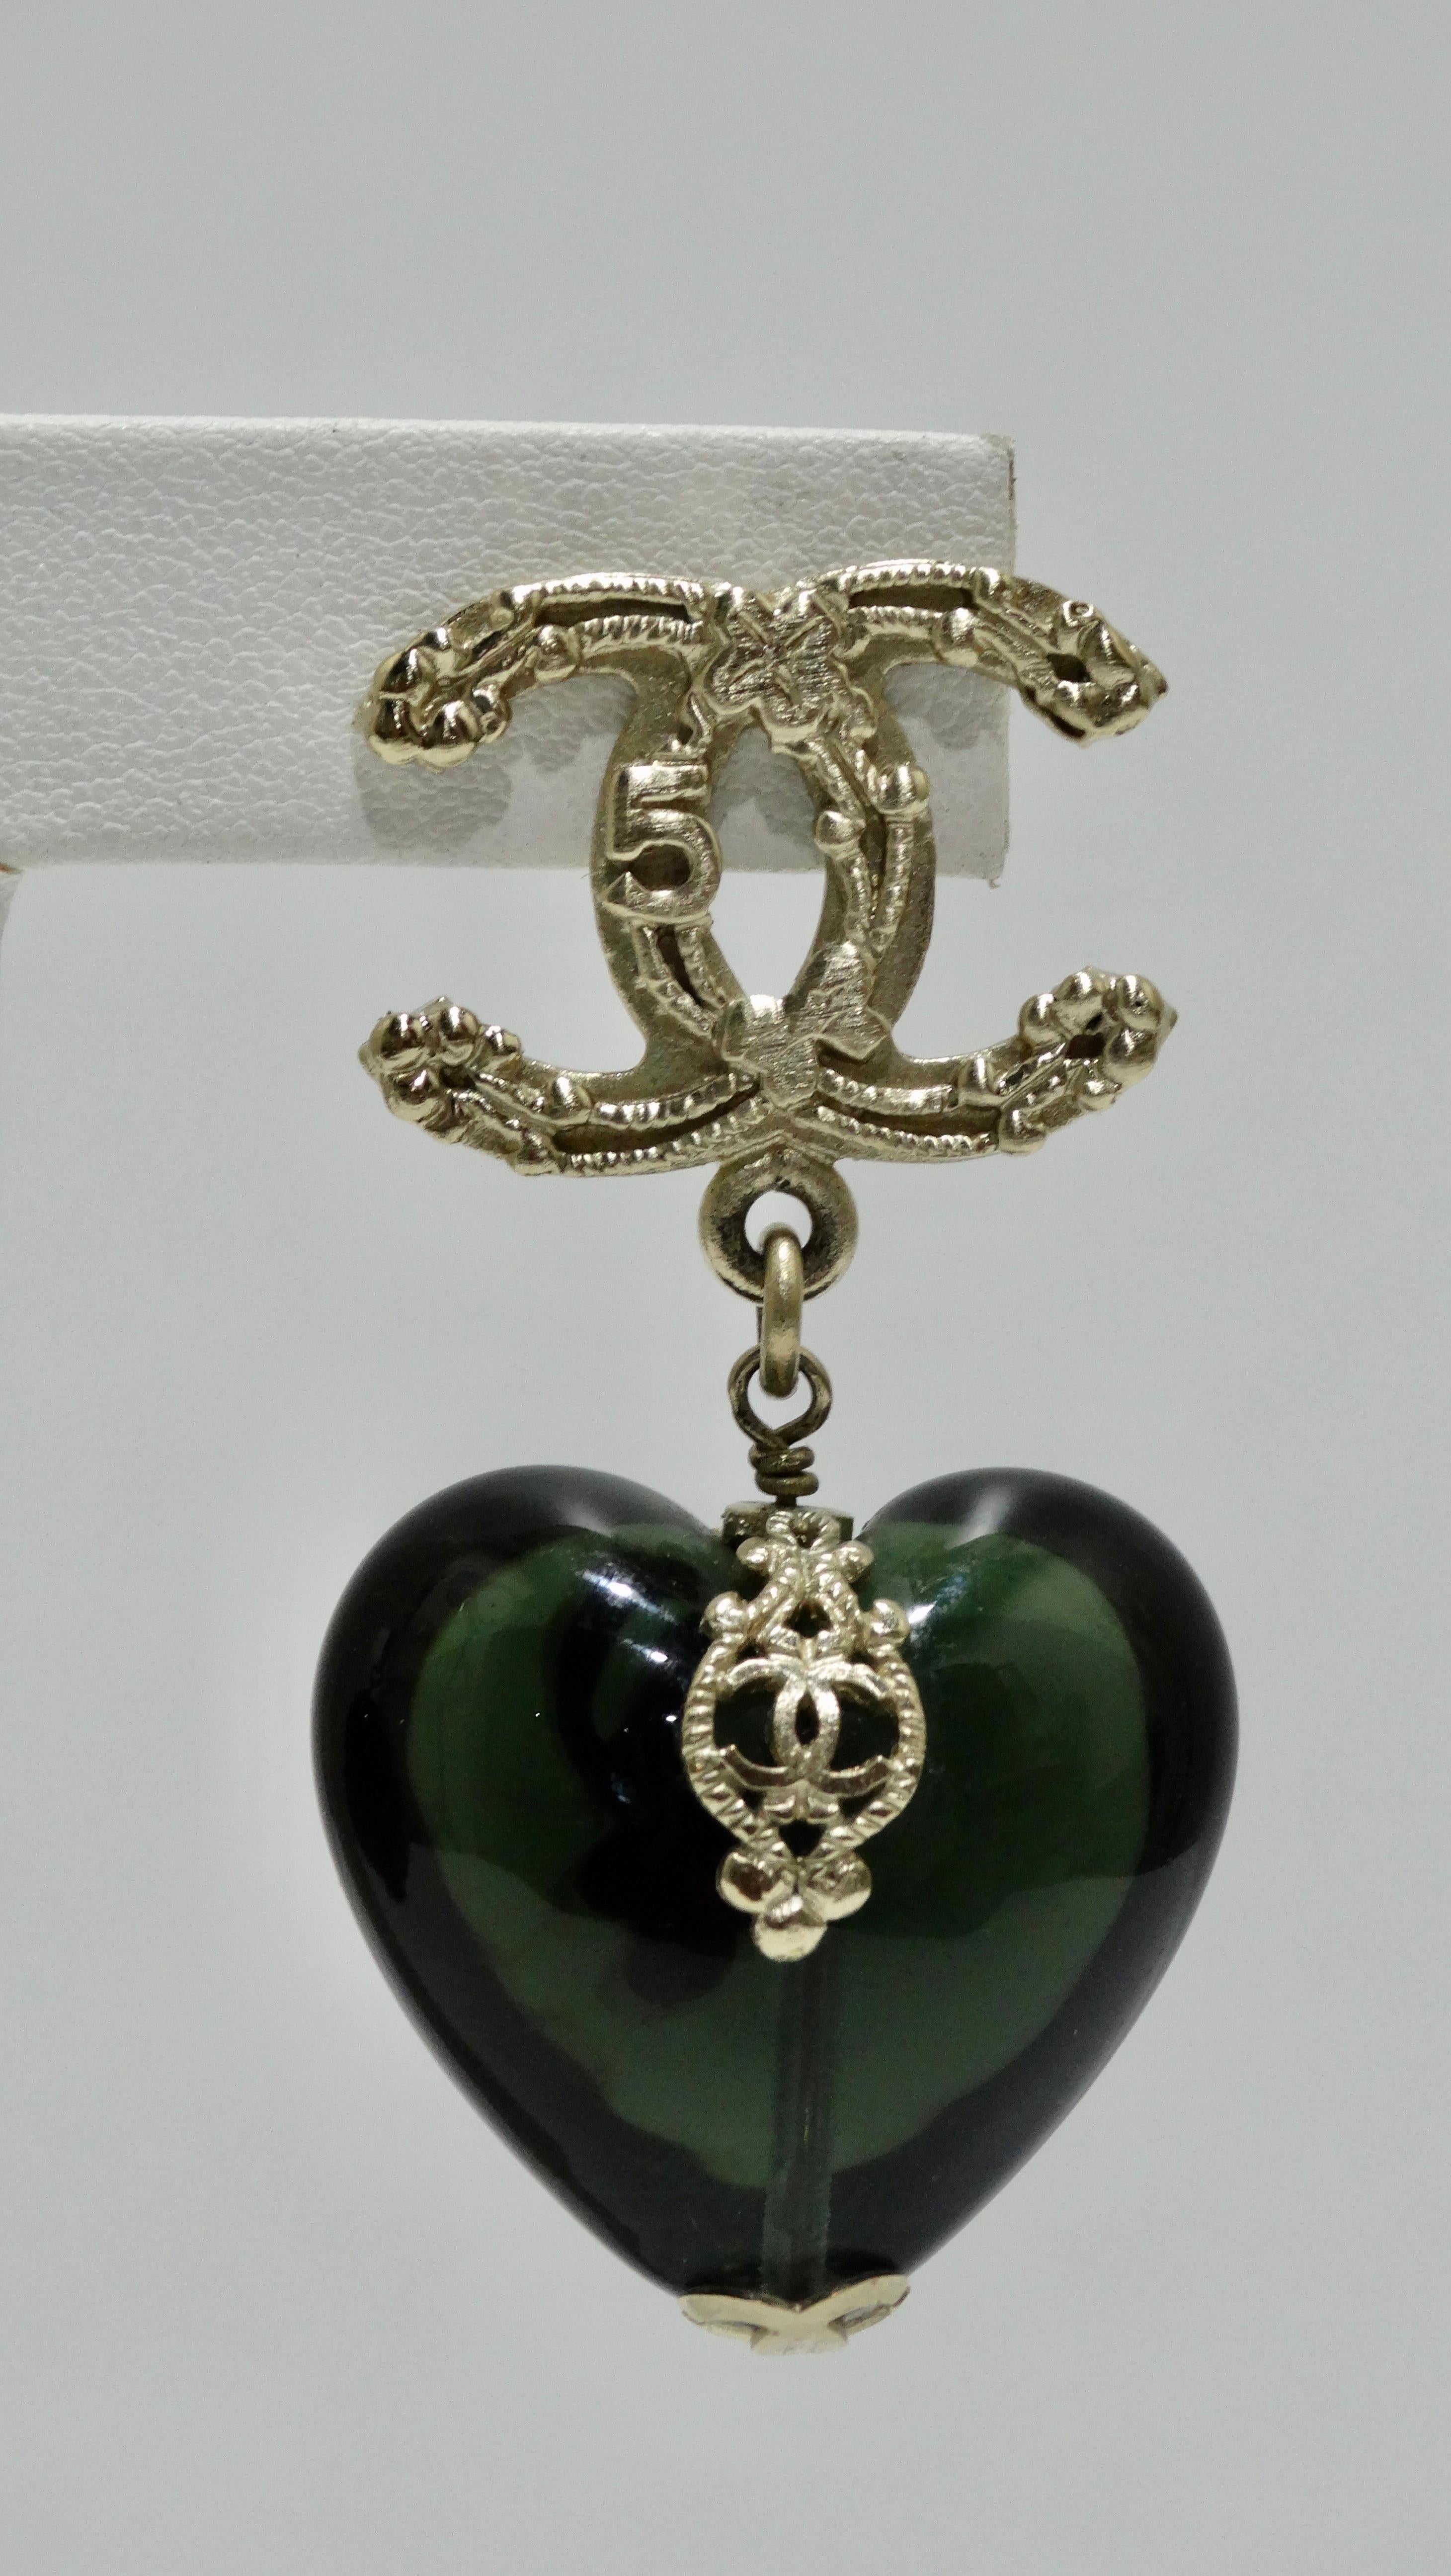 For the ultimate Chanel lover! Circa 2006 from their fall/winter collection, these earrings feature a green tone resin heart hanging from a large CC that is decorated with symbols unique to Coco; the four leaf clover, no. 5, bows and of course the